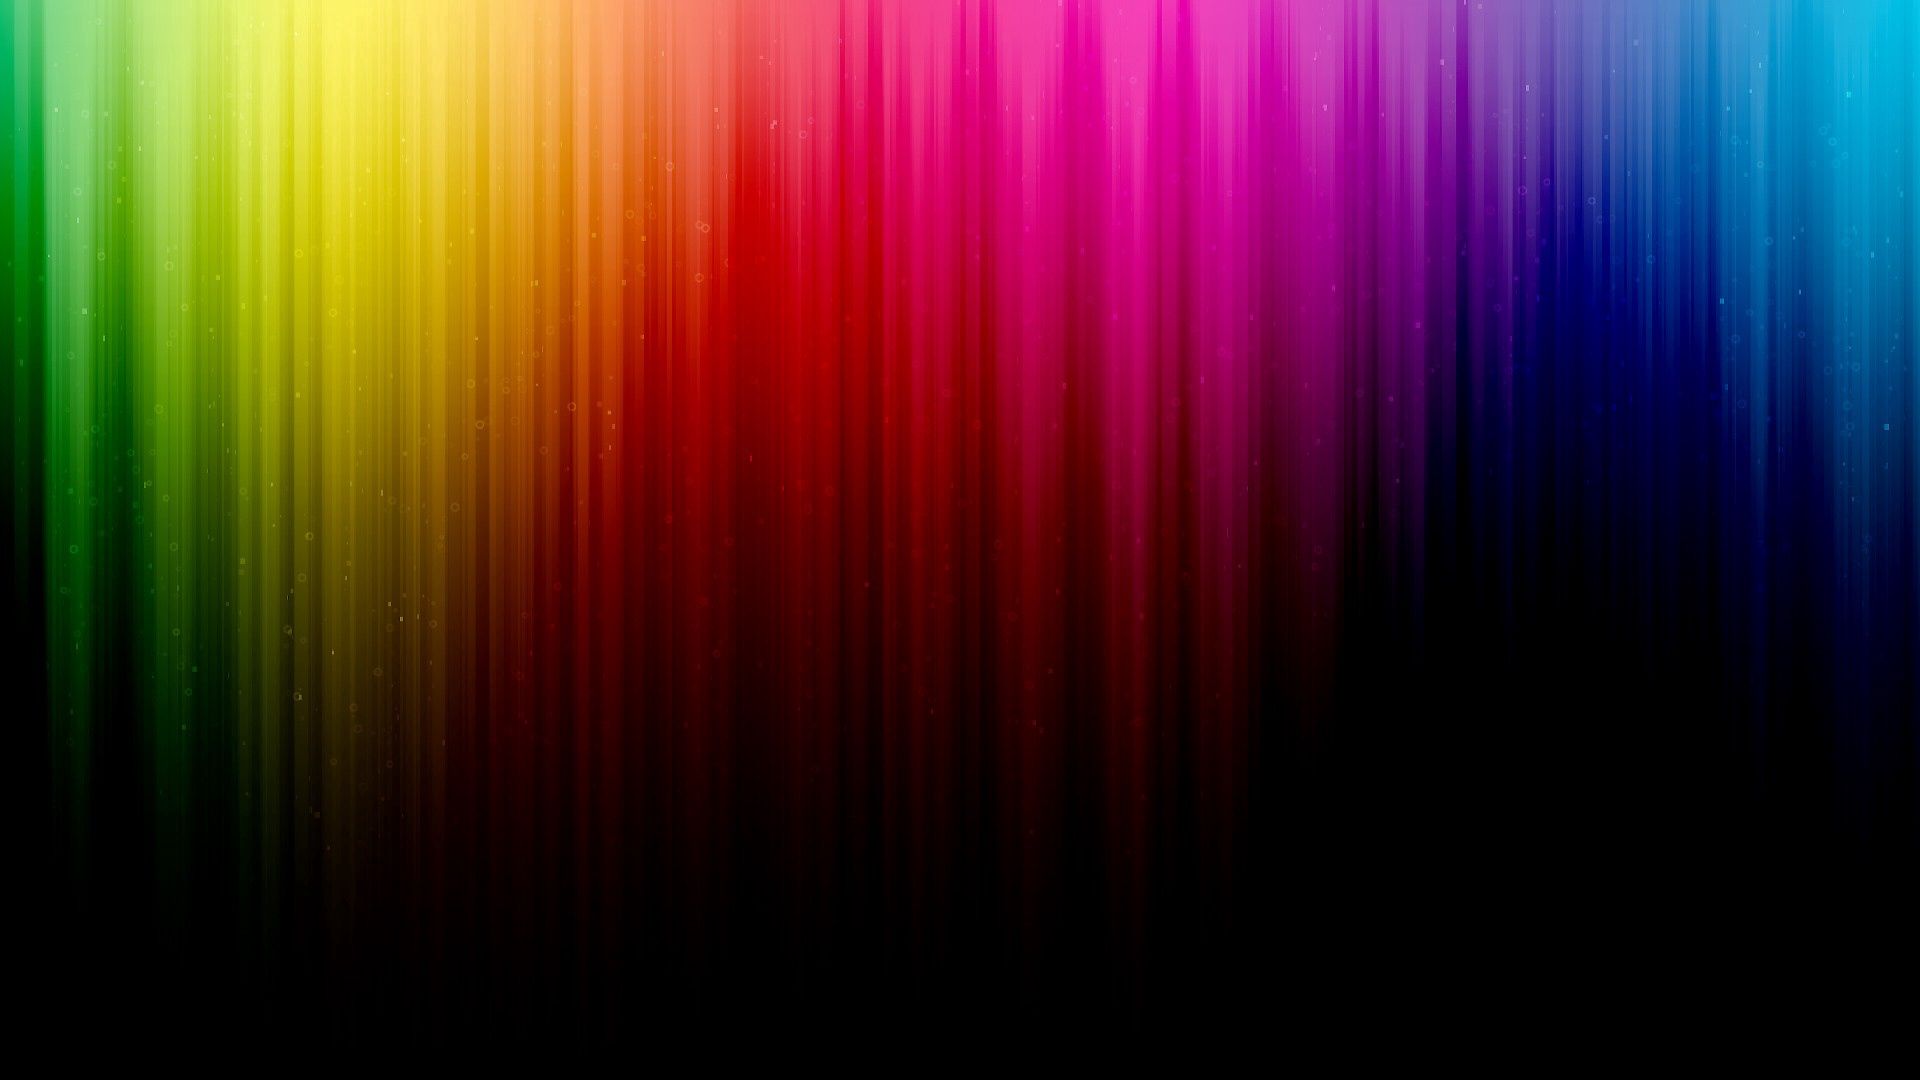 streaks, abstract, background, rainbow, lines, shadow, stripes, iridescent, vertical Full HD